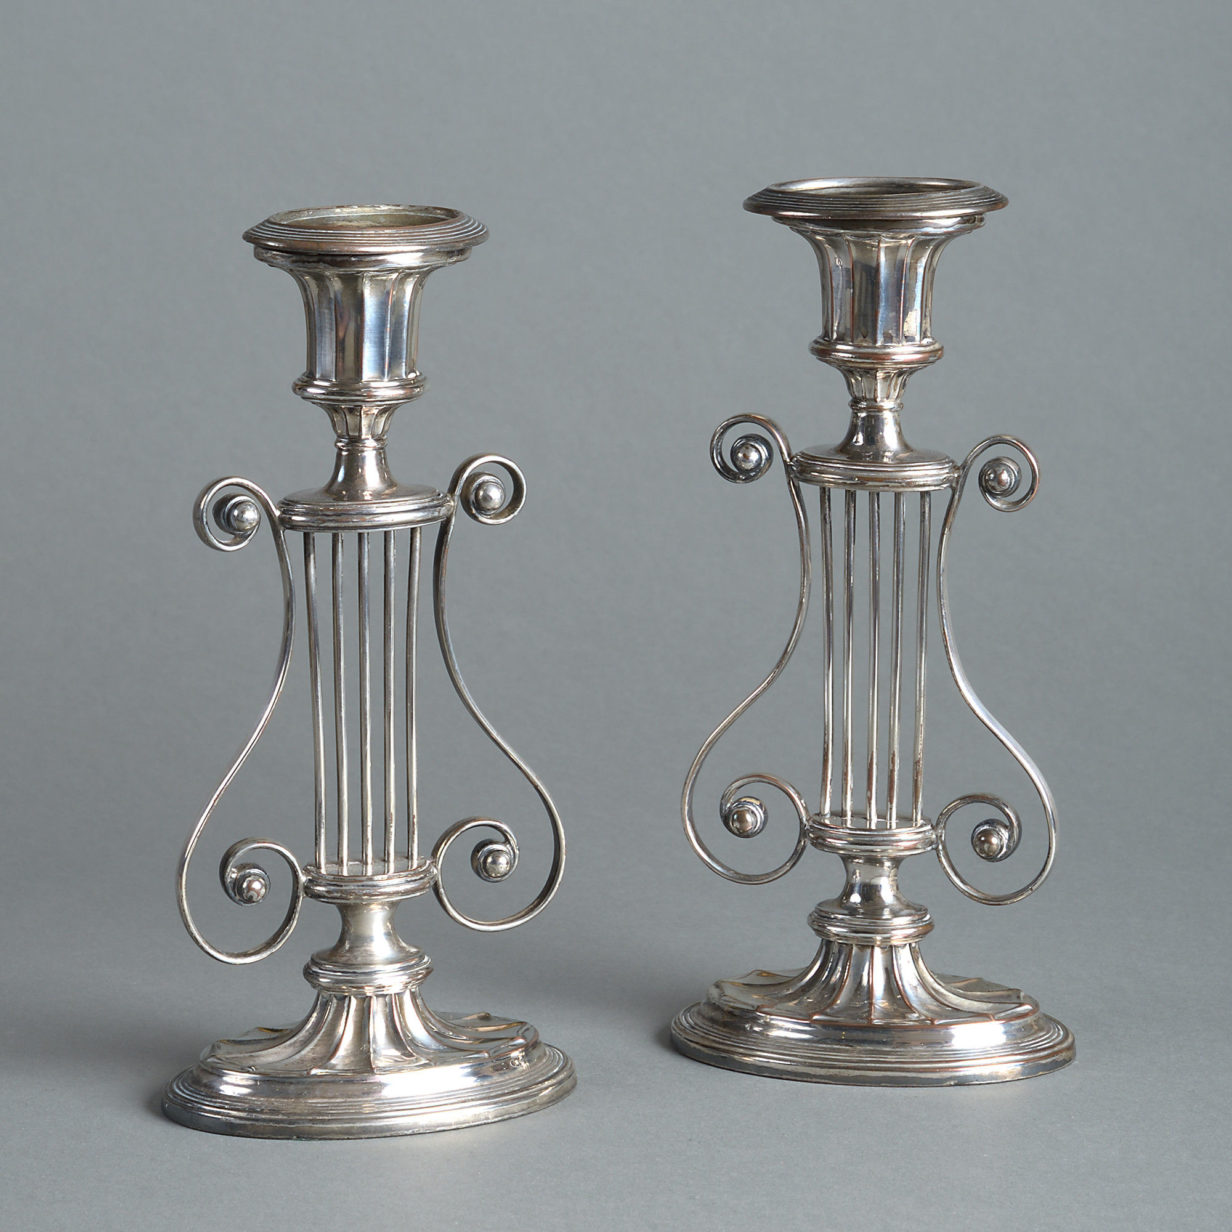 A pair of early 19th century sheffield plate candlesticks